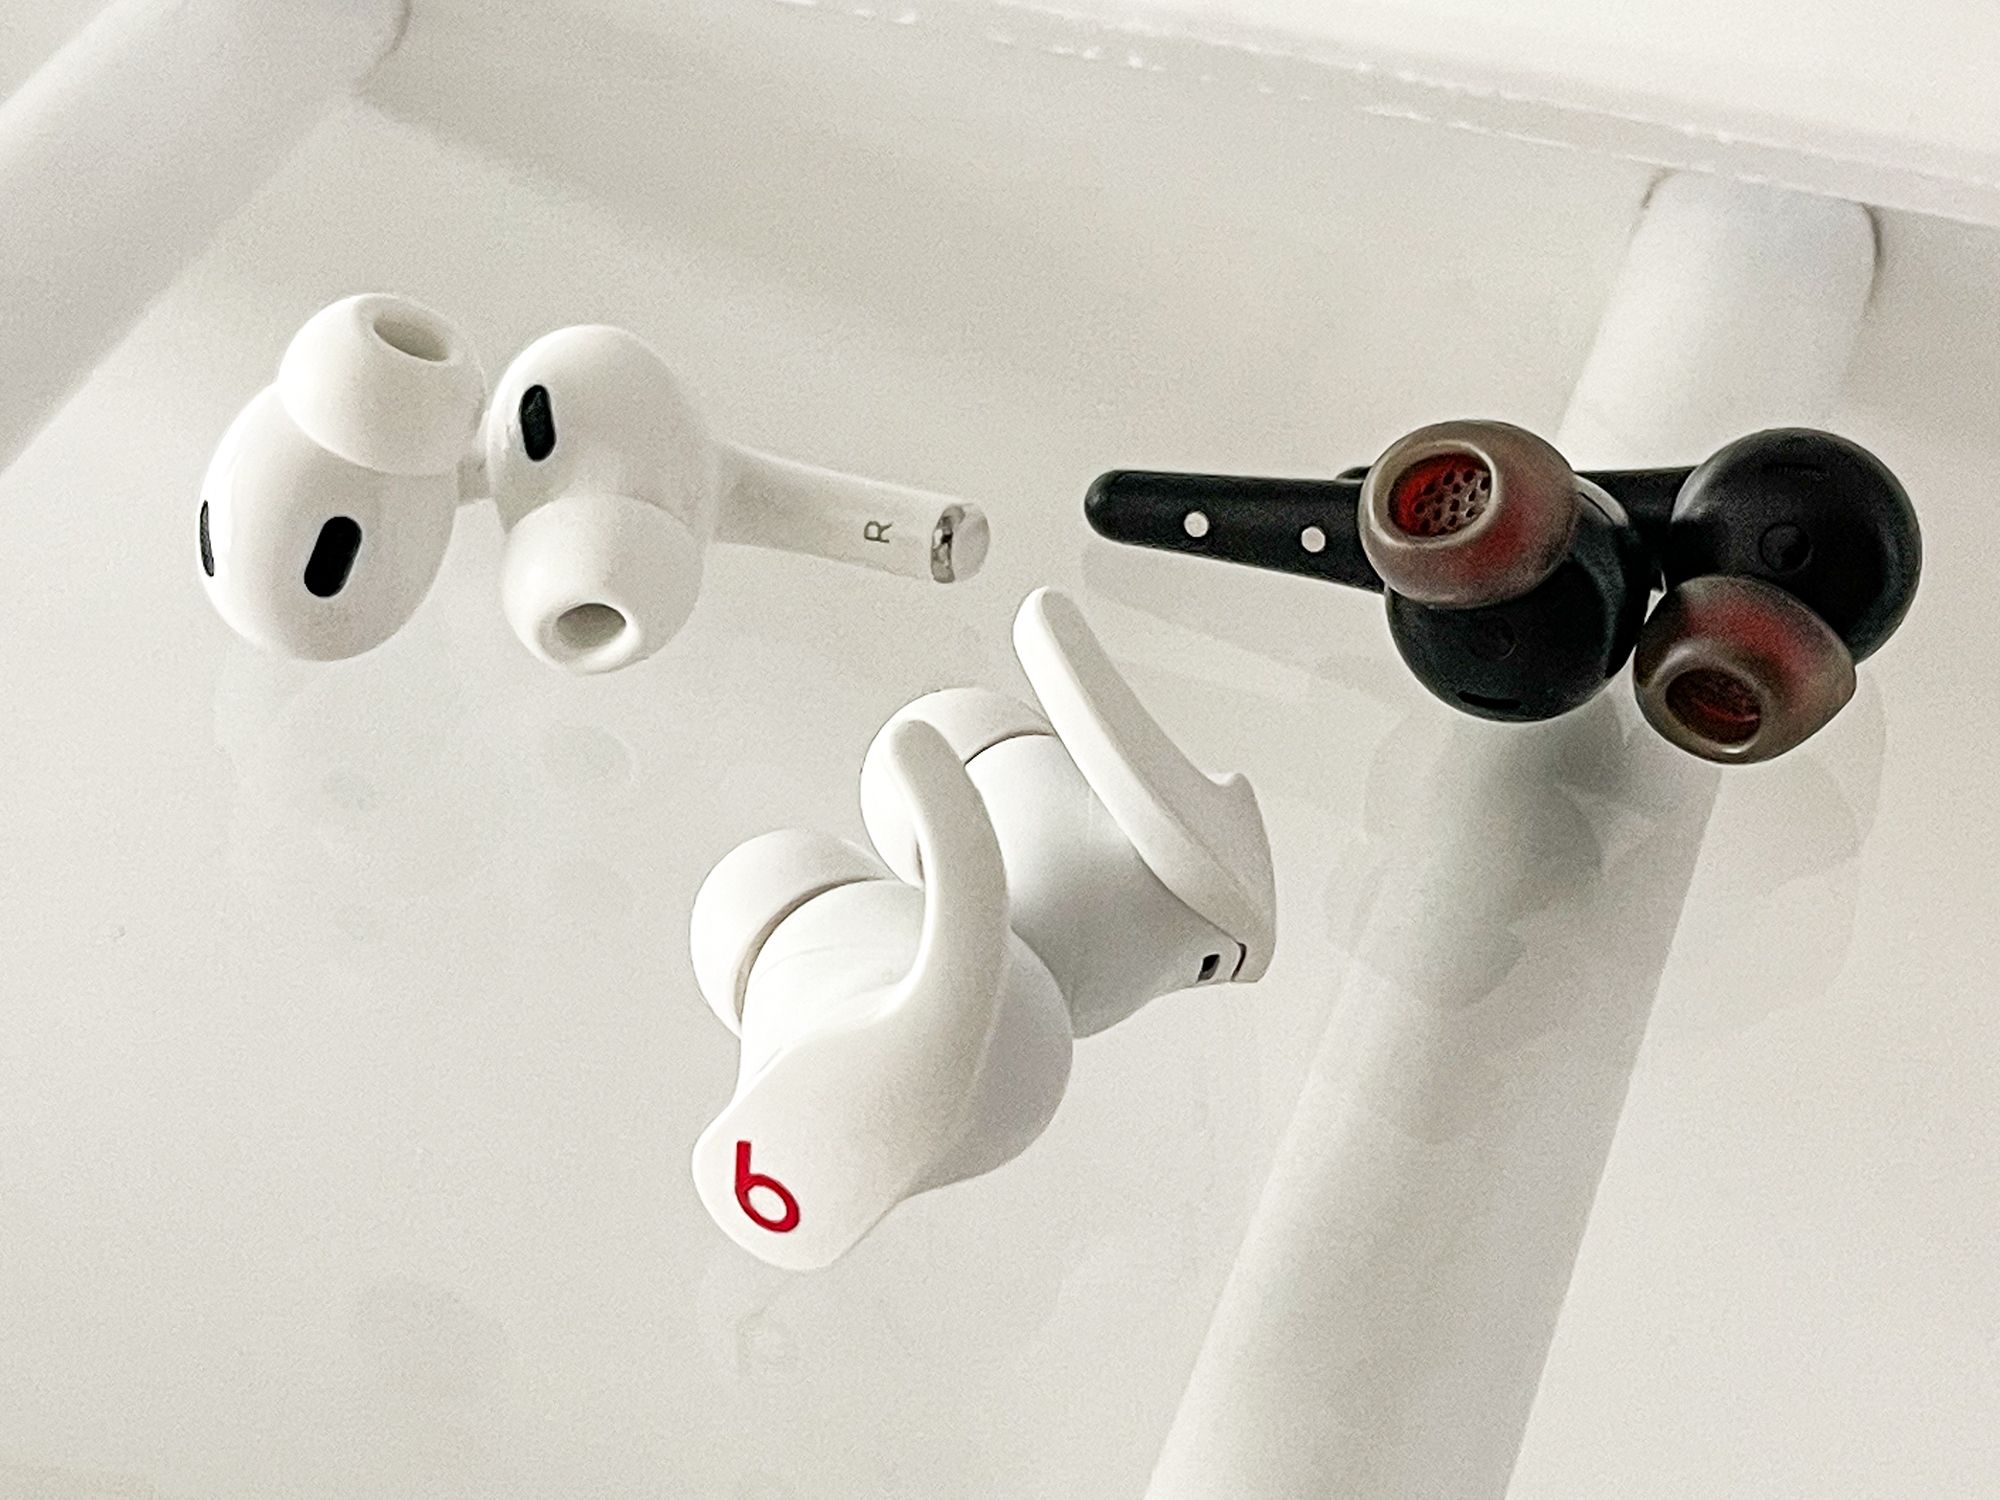 Apple AirPods Pro review: clever earbuds with great sound